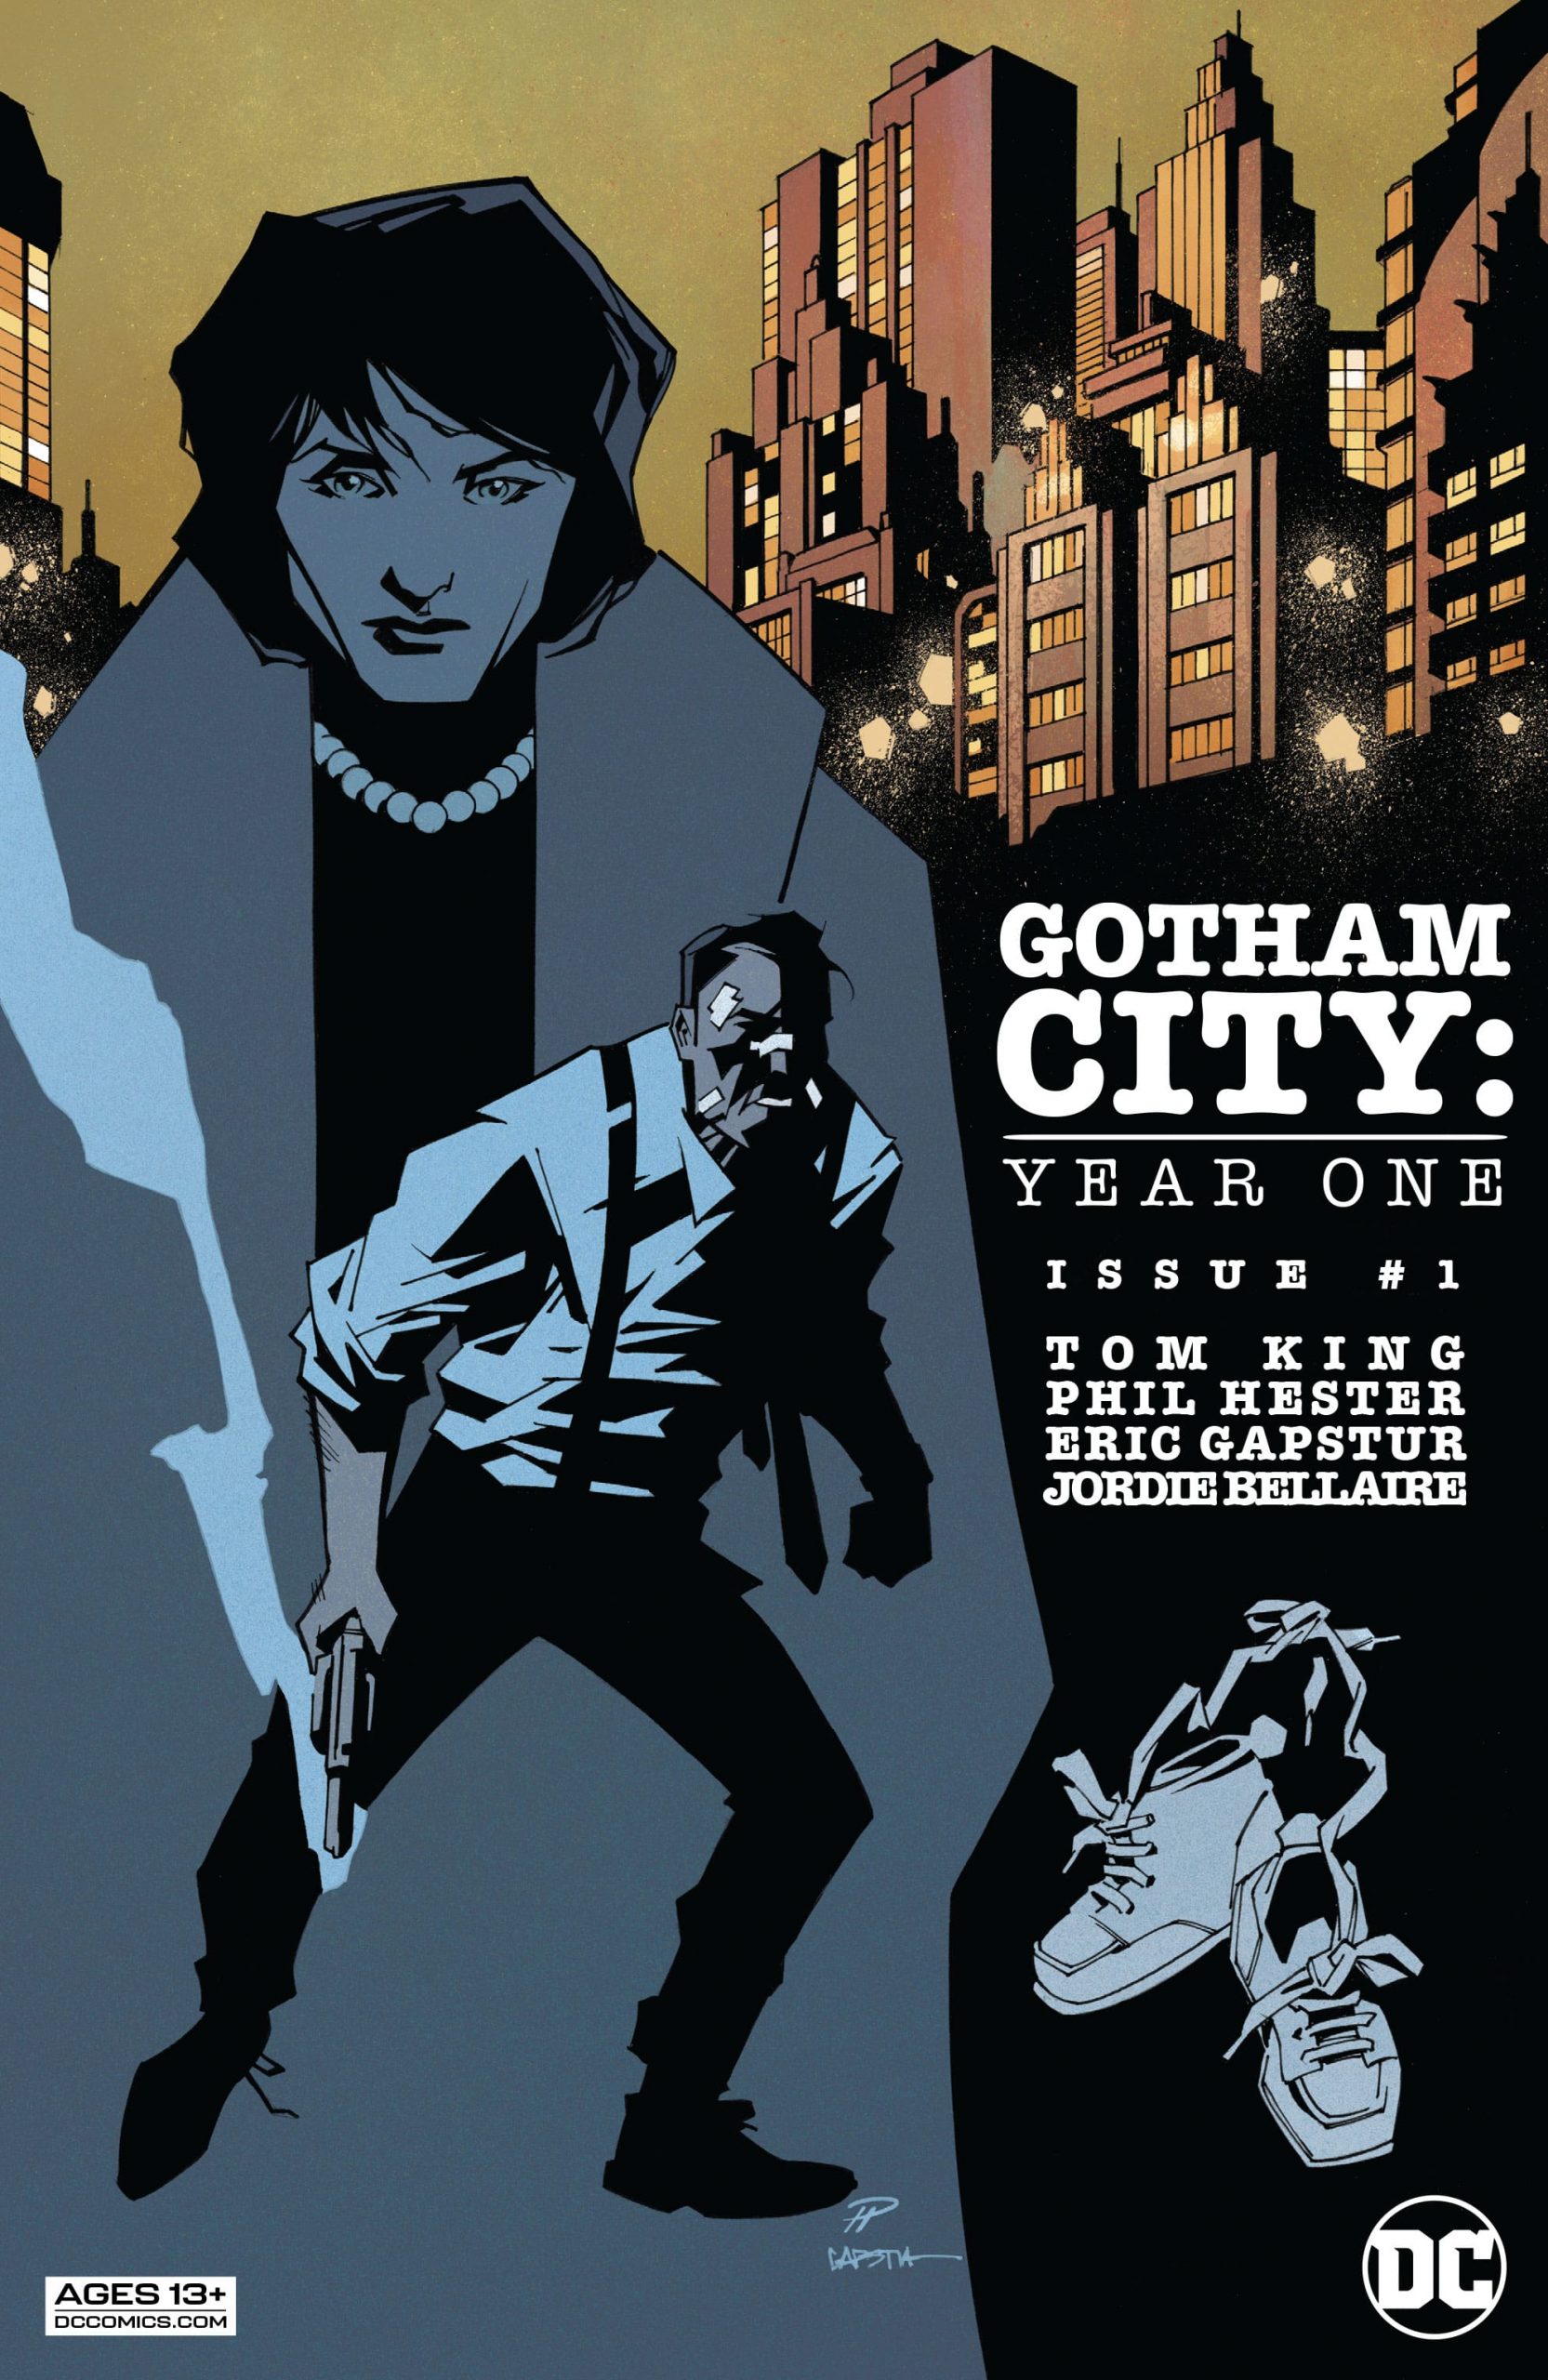 DC Preview: Gotham City: Year One #1